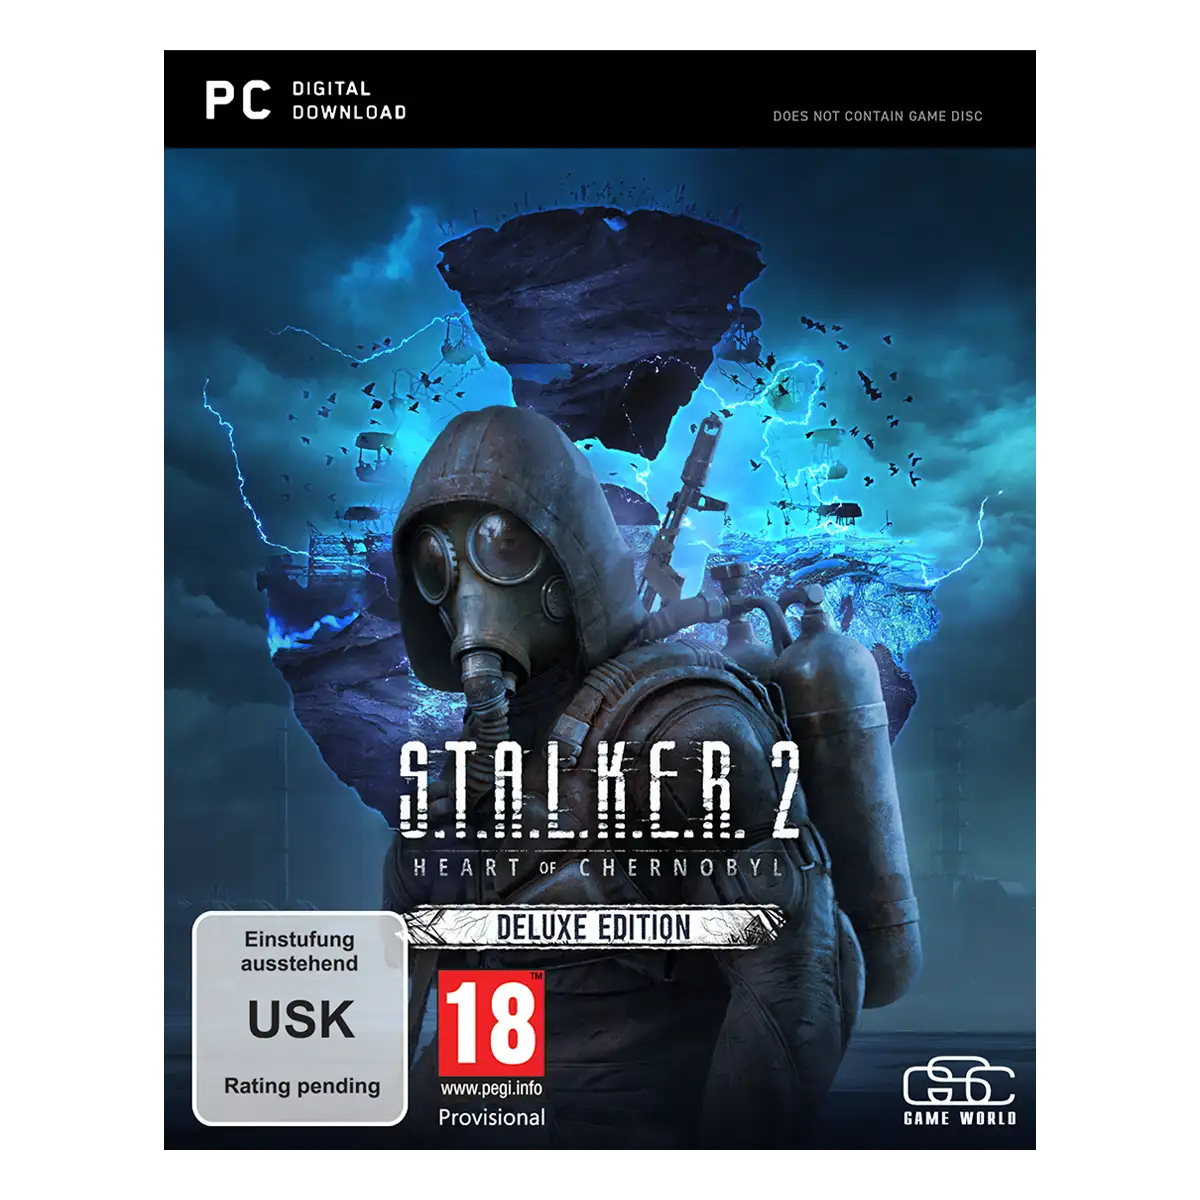 S.T.A.L.K.E.R. 2: Heart of Chornobyl Collector's Edition (PC)